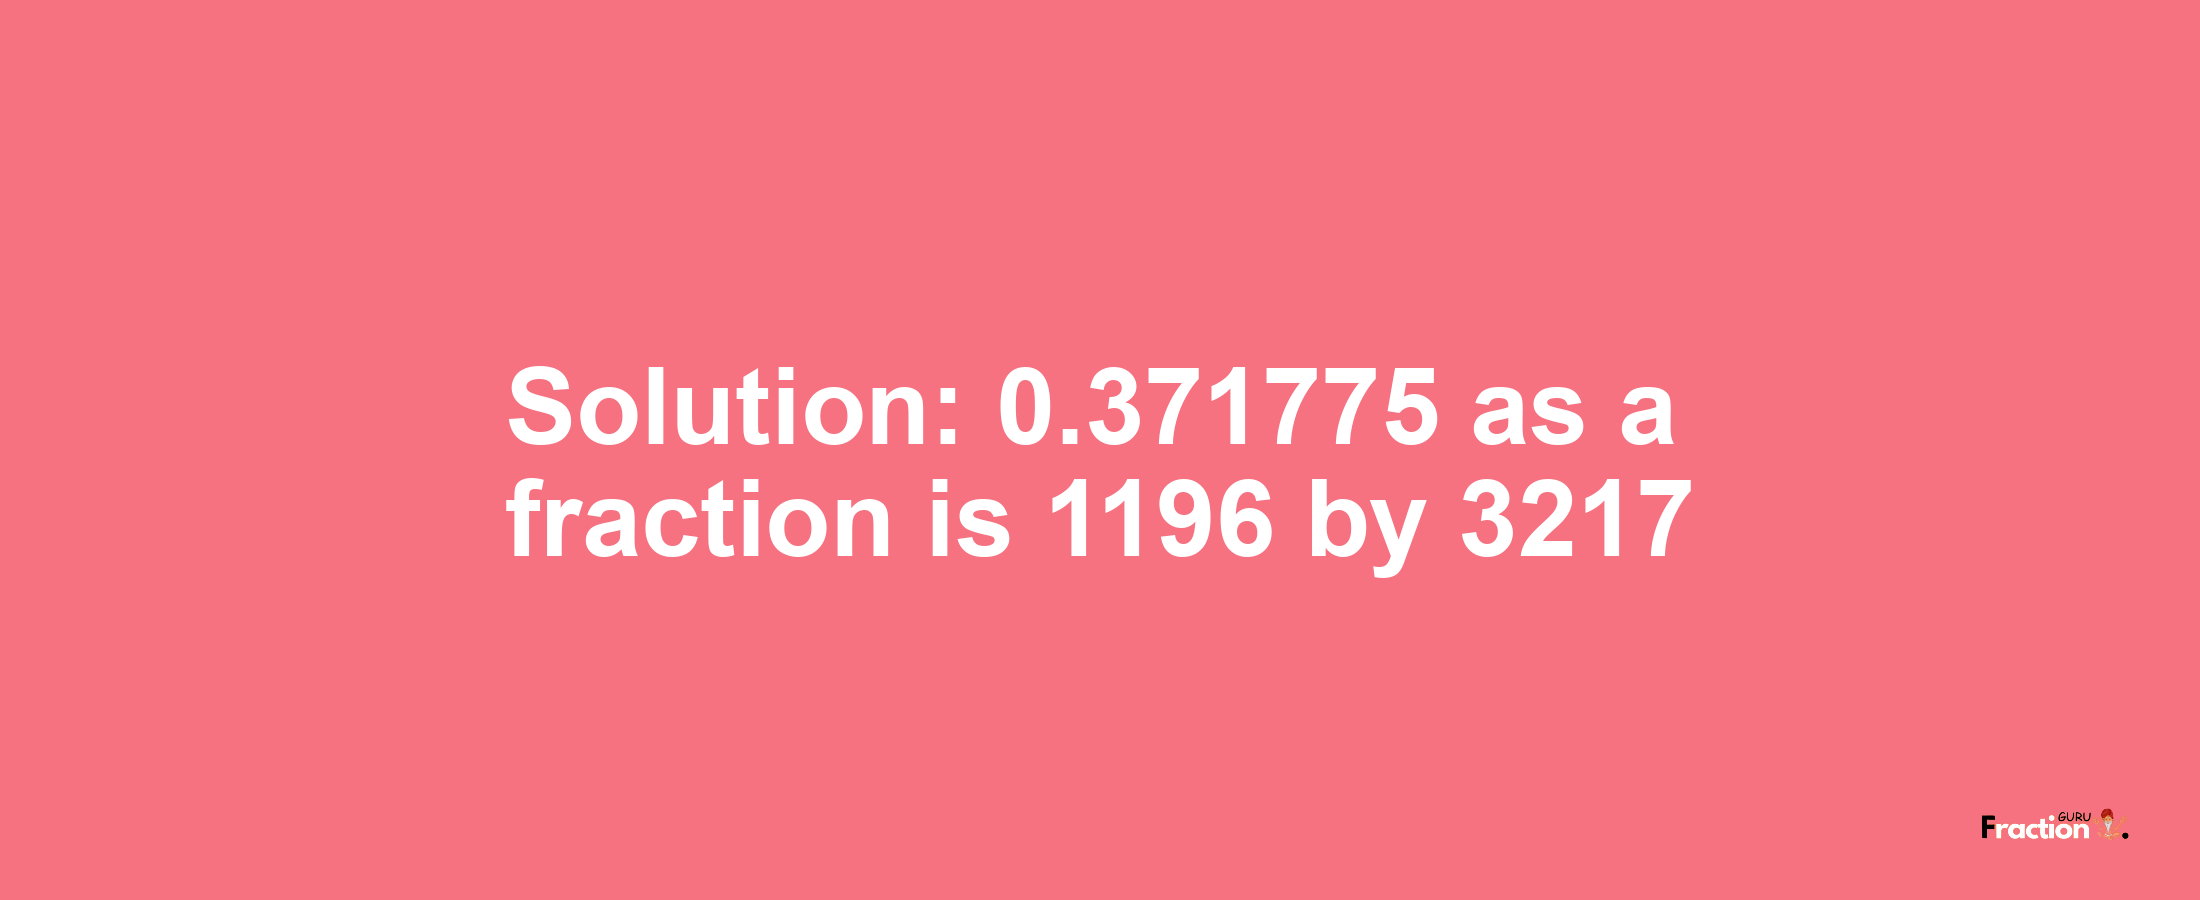 Solution:0.371775 as a fraction is 1196/3217